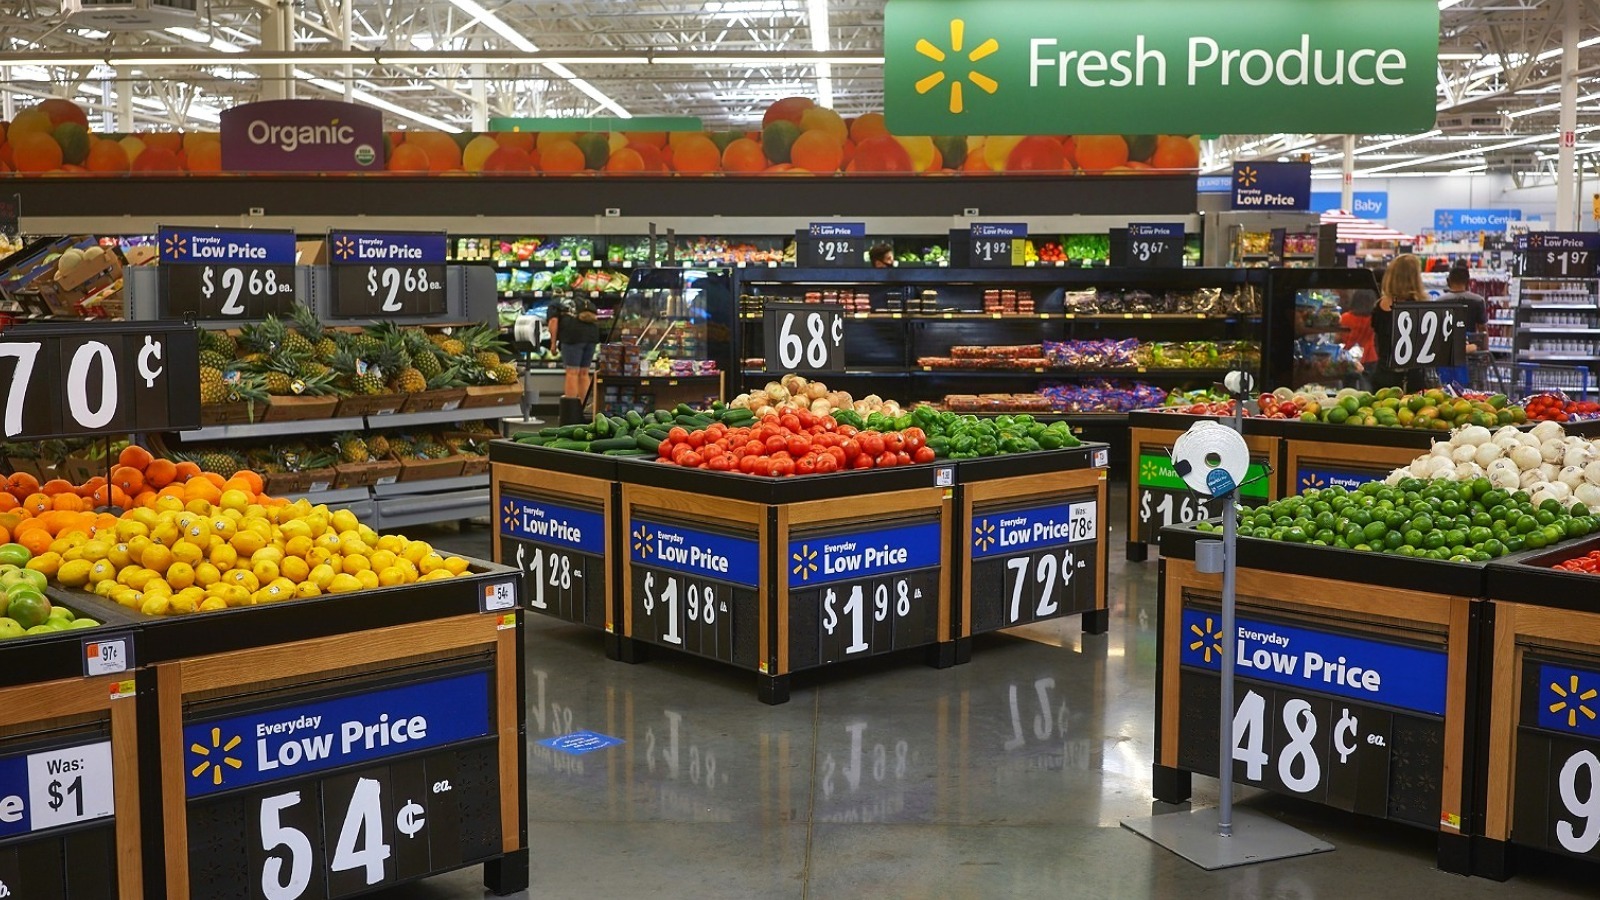 The Fruit Walmart Has Sold More Of Than Any Other Merchandise